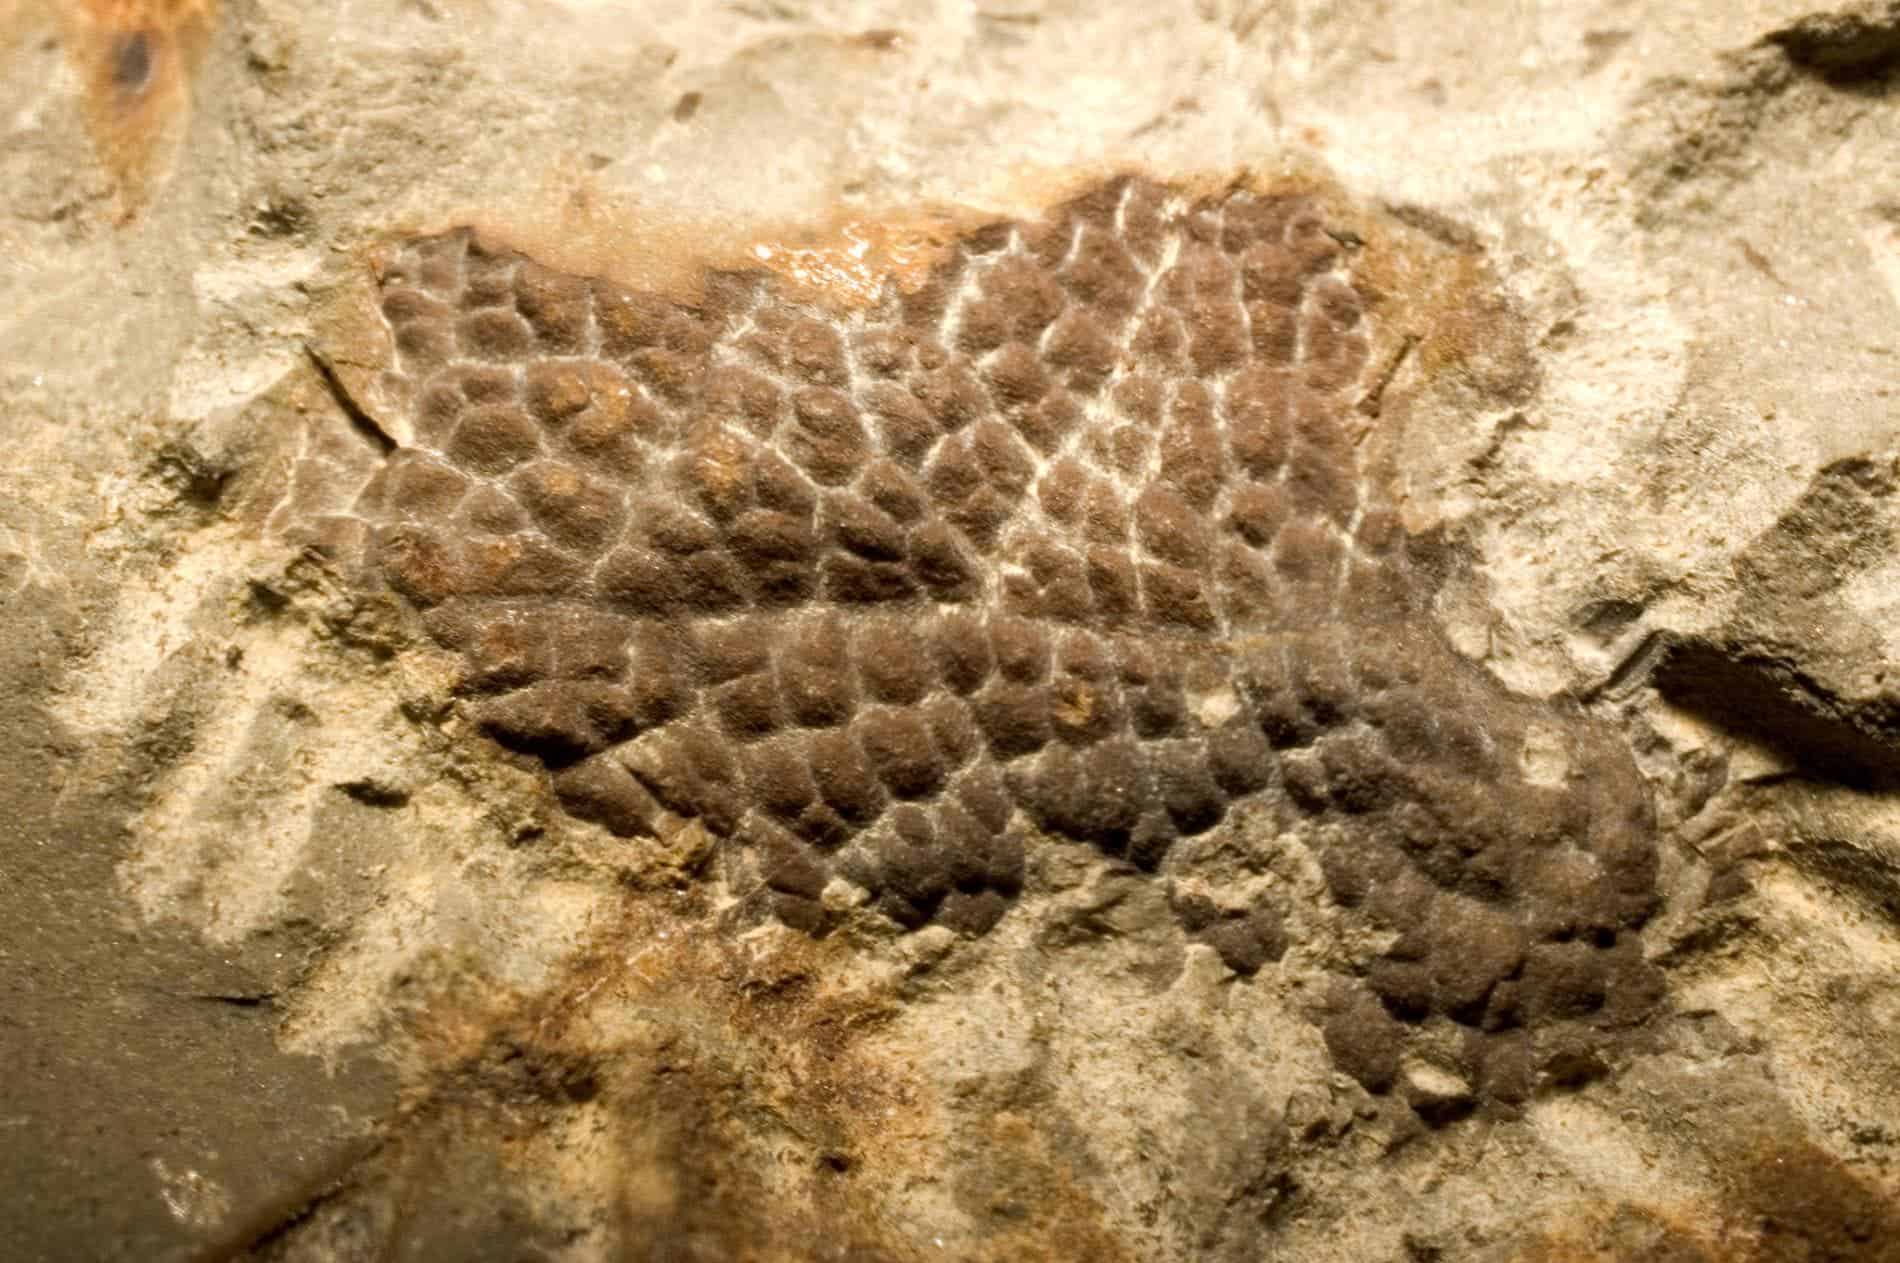 This fossilized skin comes from the neck of a Tyrannosaurus rex. Image credits: Peter Larson.